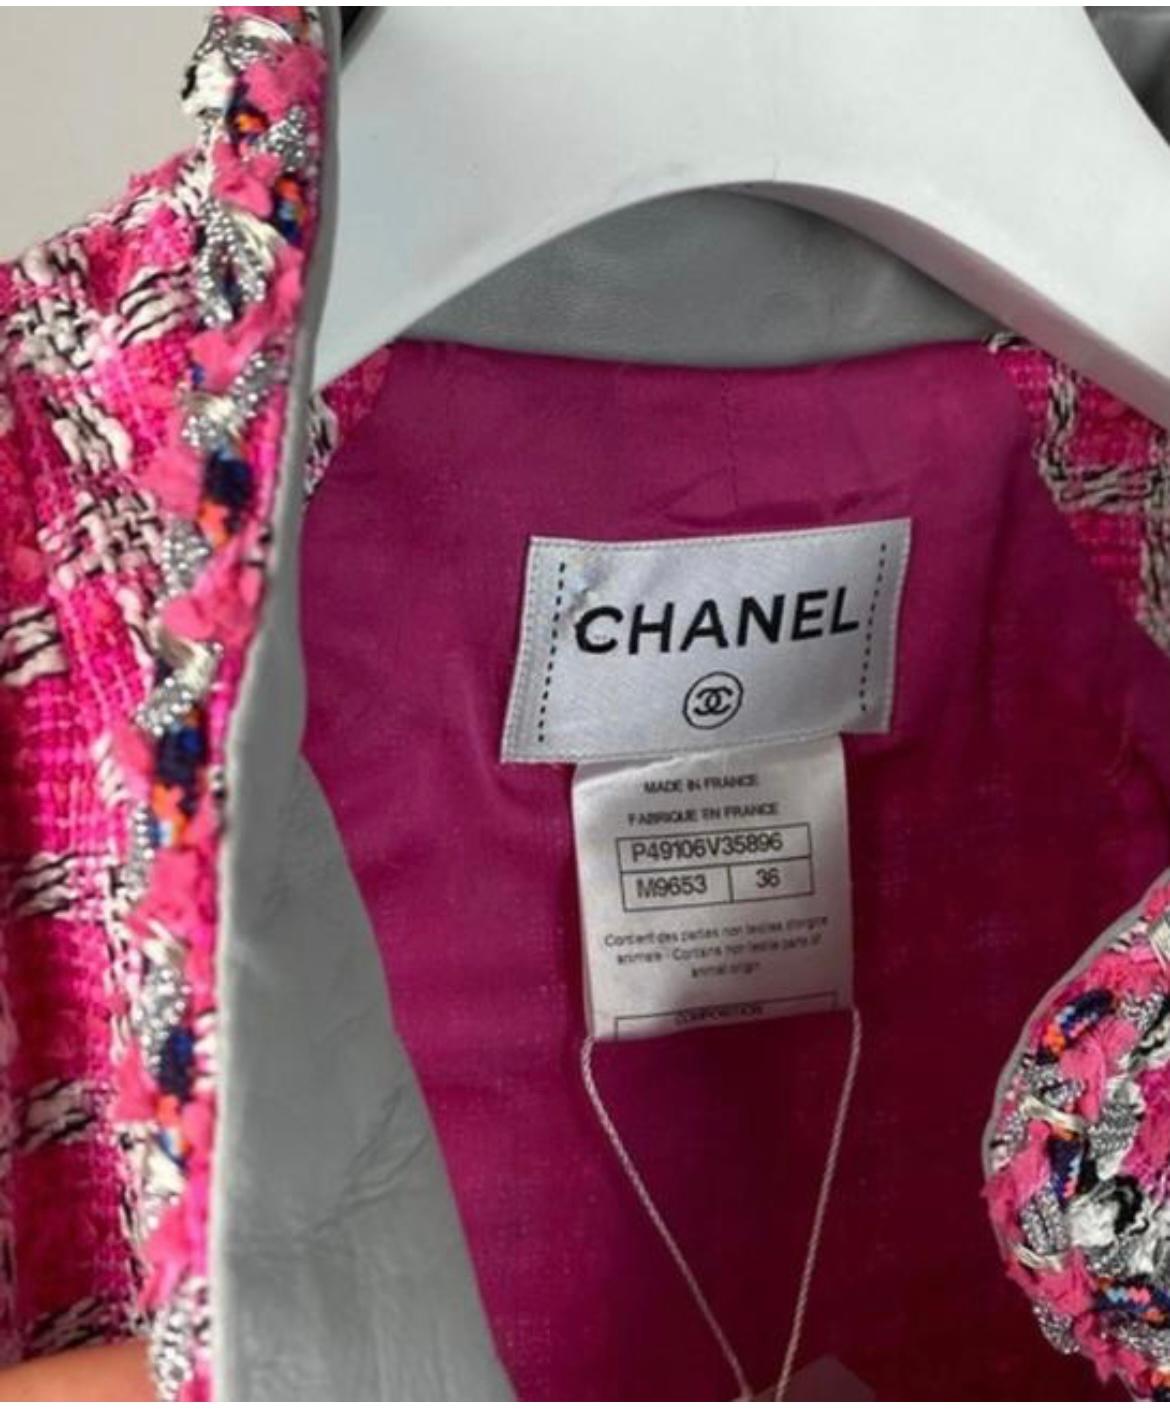 CHANEL S/S 2014 RUNWAY EMBELLISHED TWEED MINI DRESS SIZE FR 36 US 4 RETAIL $6,350. Runway statement dress in pink tweed. 

Dress has been altered at the chest area, and it fits a smaller size, 34. 